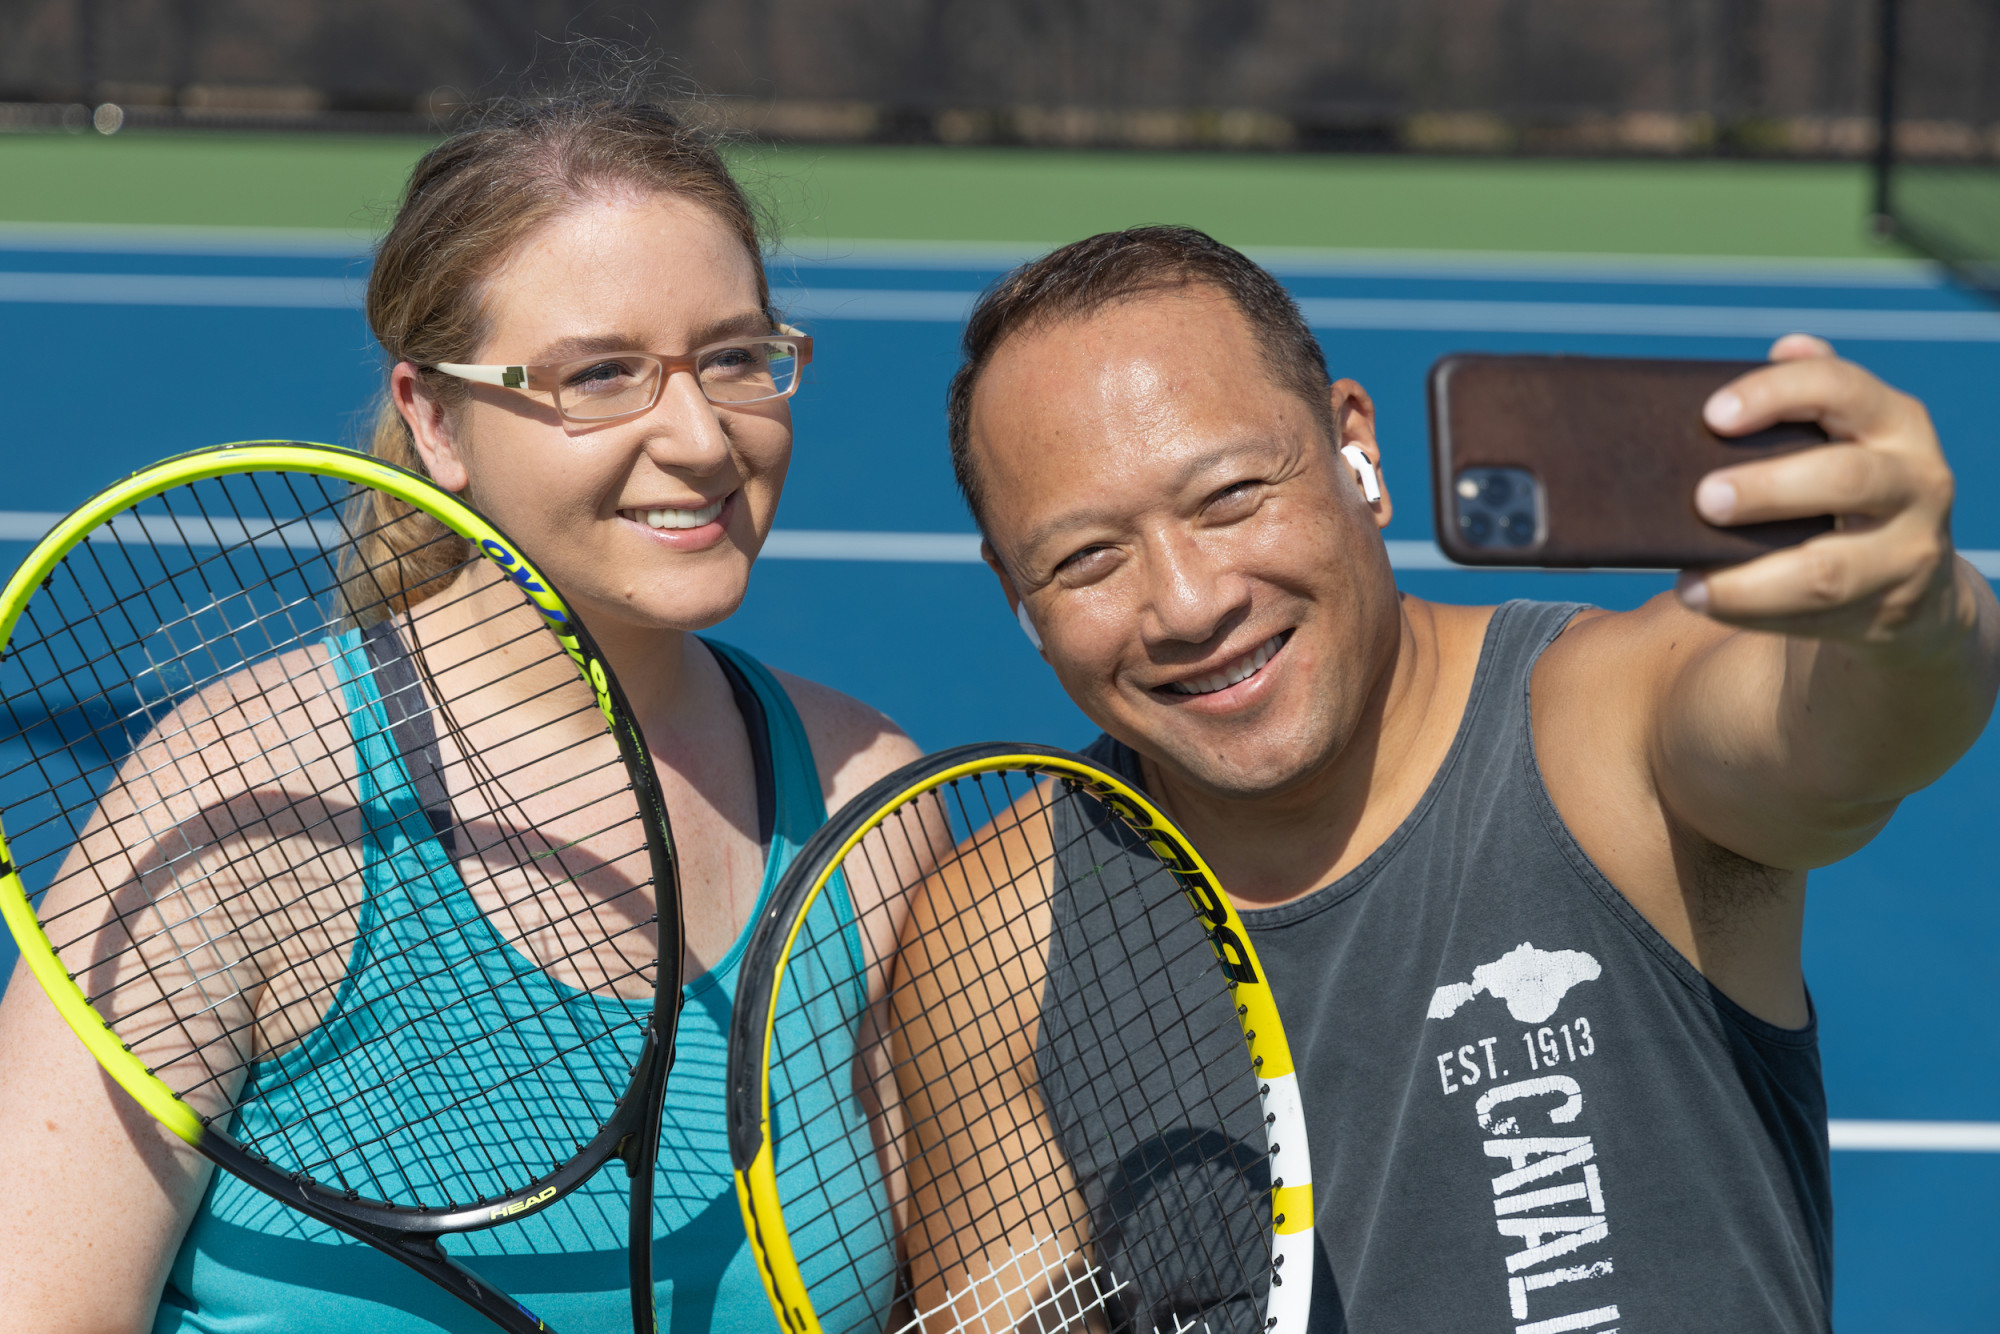 People taking a selfie at a tennis court with their rackets